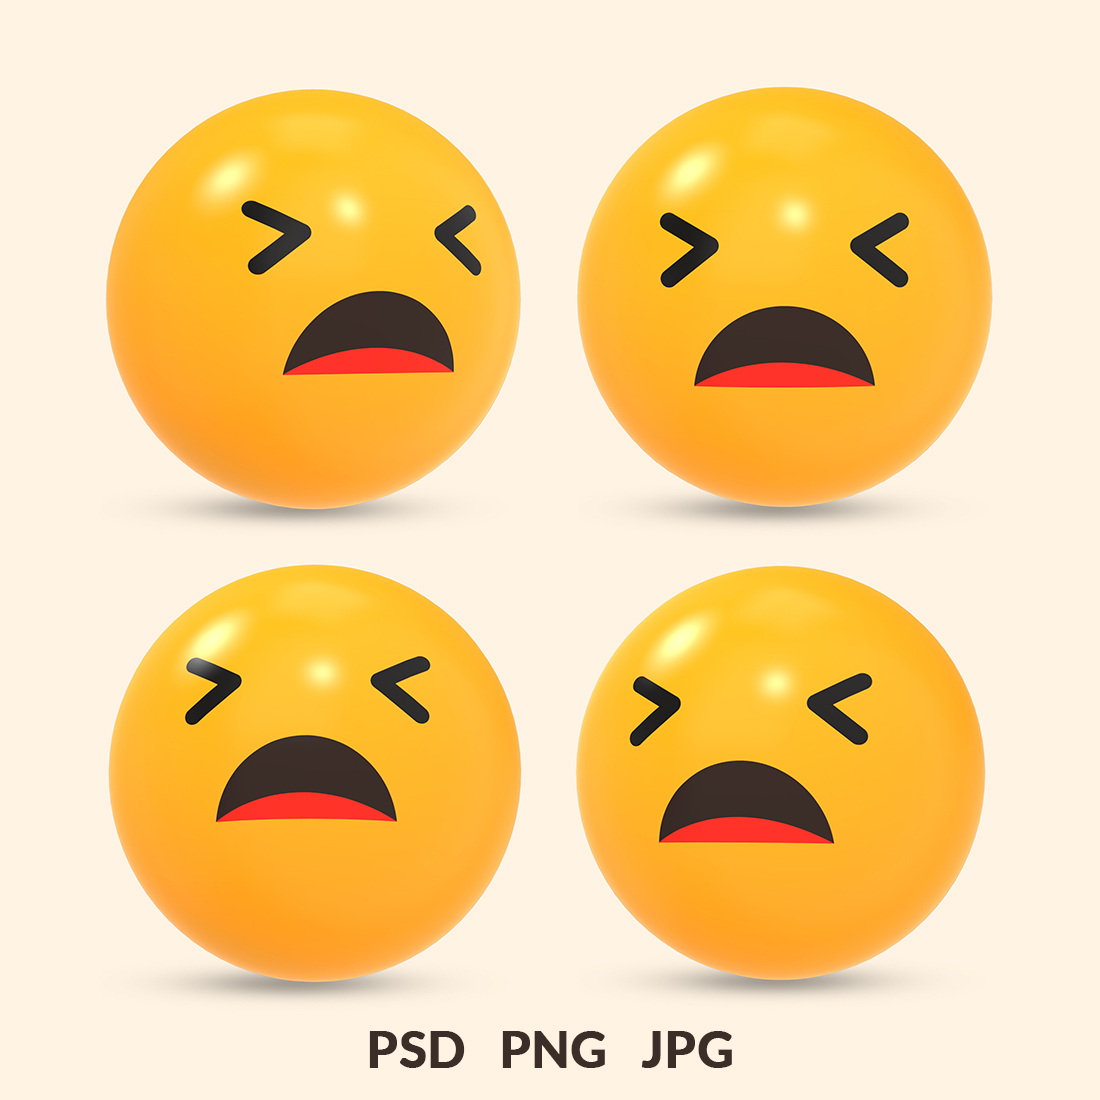 3D rendered social media icon of tired face emoji reaction with different view cover image.